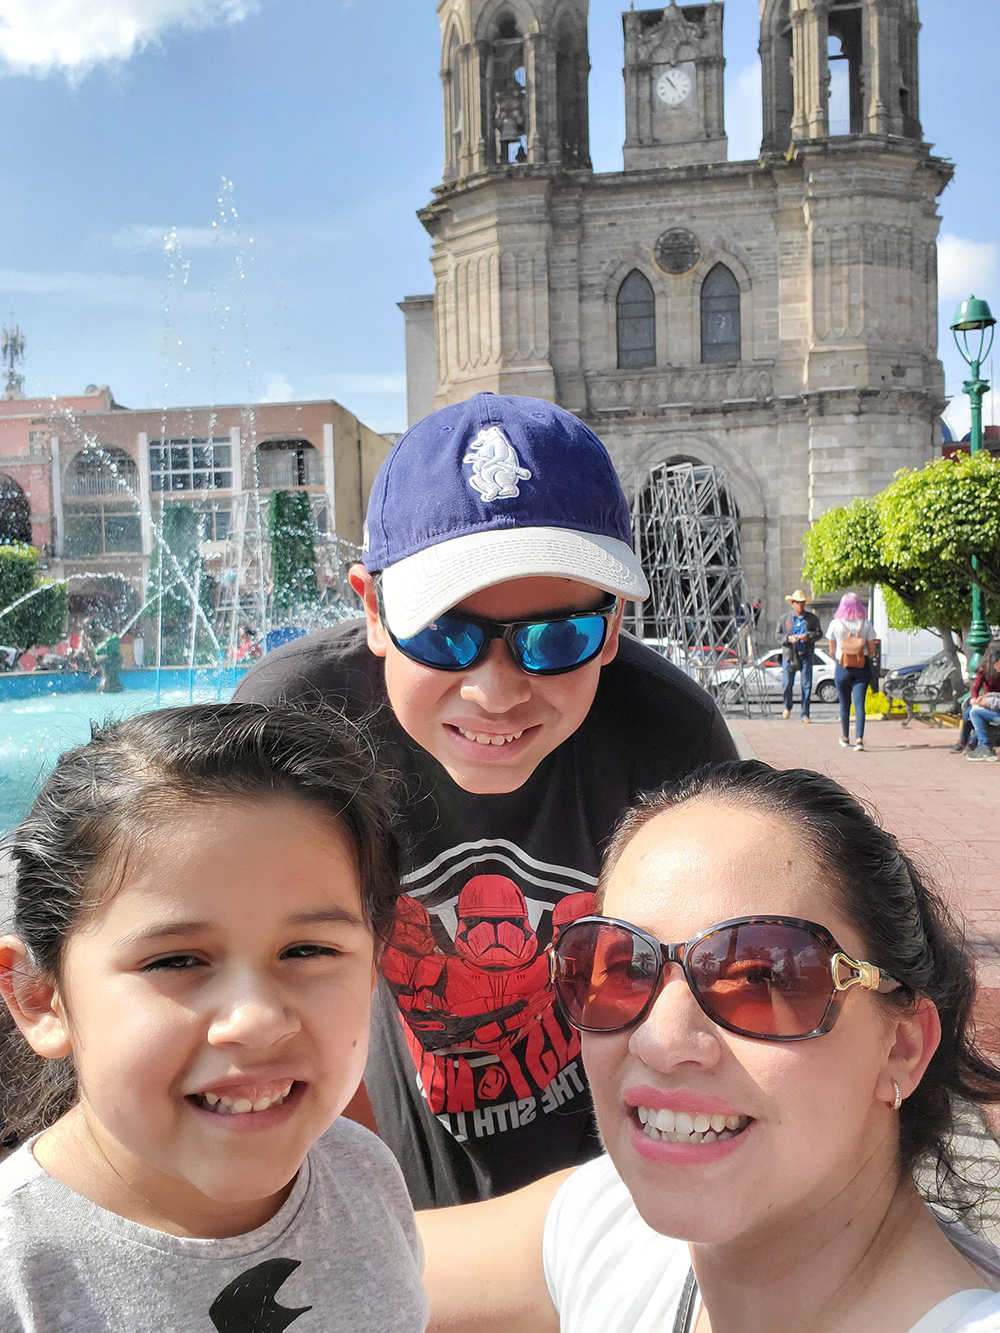 My kids and I in front of the Immaculate Conception Cathedral, known as Catedral de la Purísima Concepción, which resides in the main square of the city of Tepic